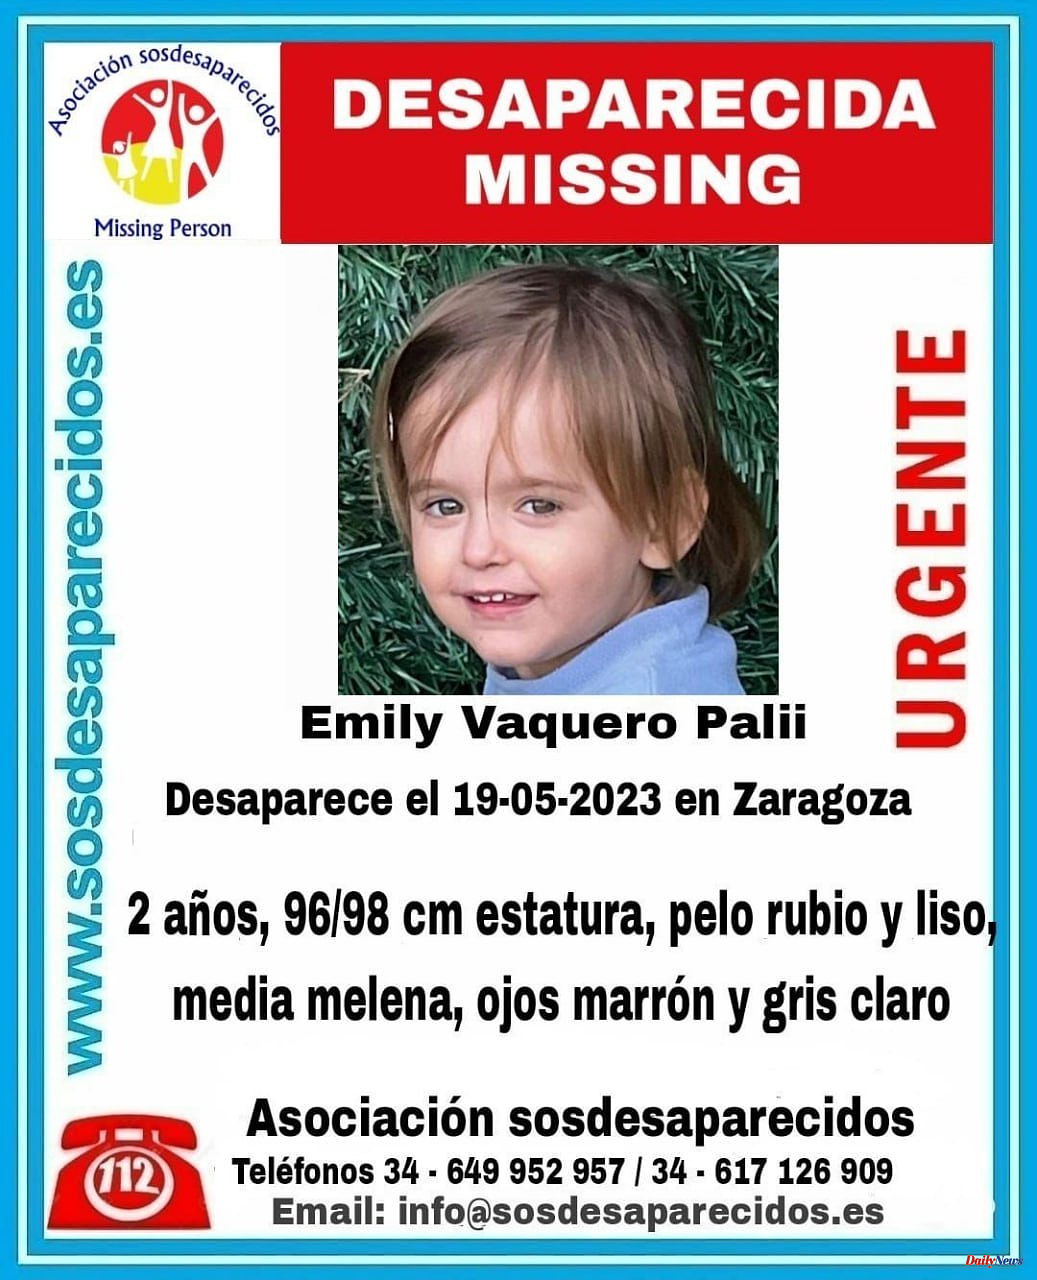 Aragon They are looking for Emily, a two-year-old girl kidnapped by her mother in Zaragoza